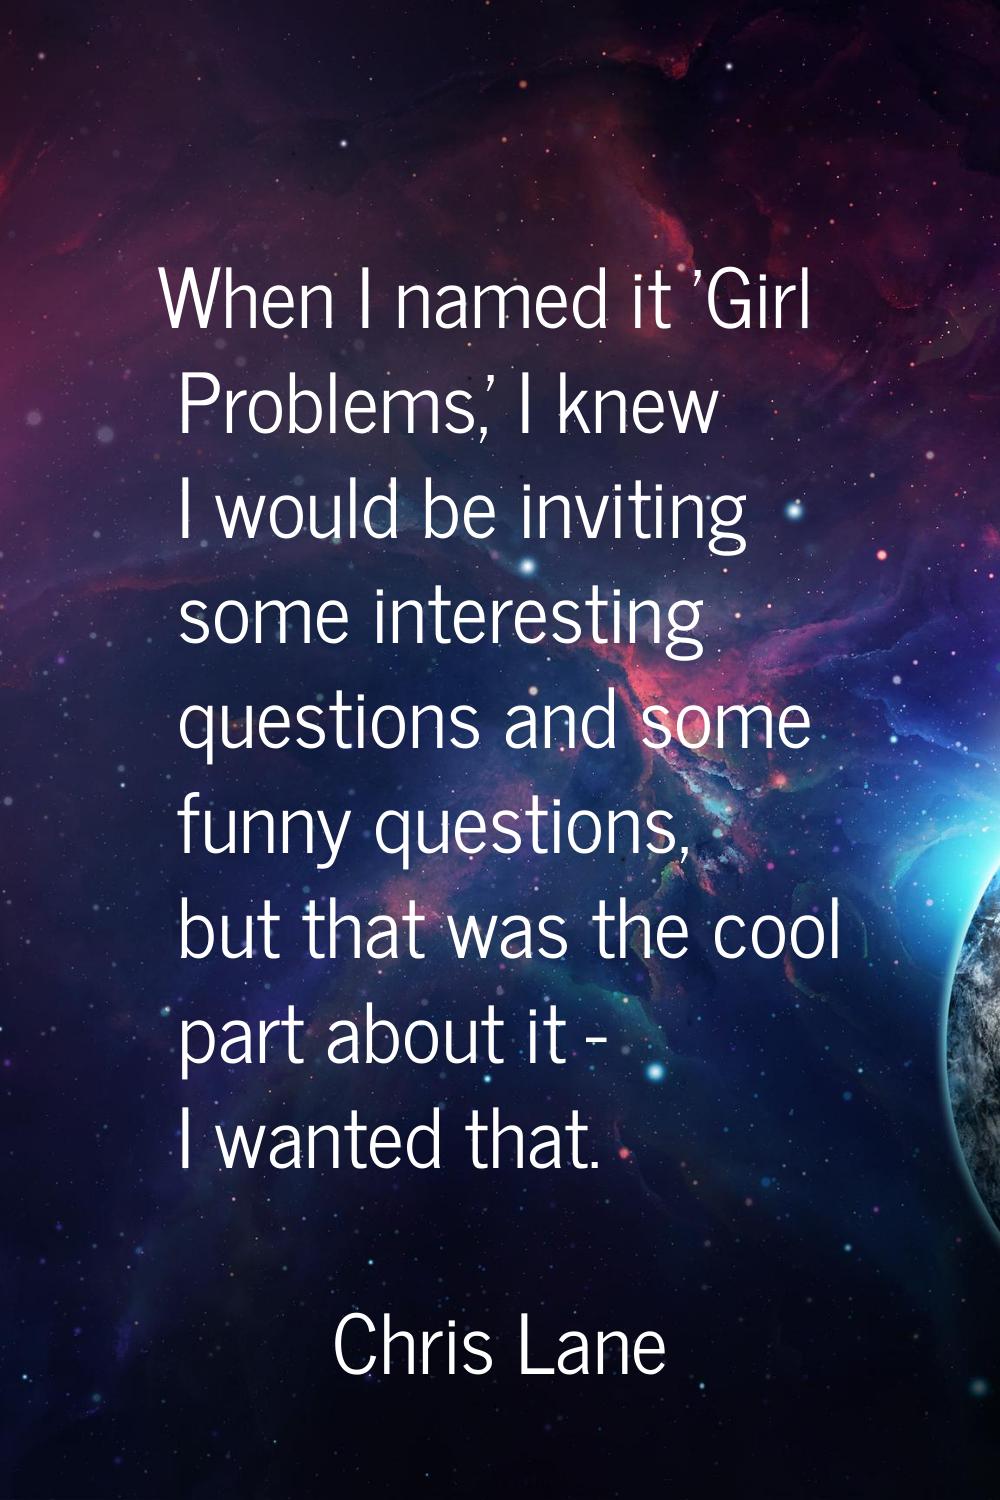 When I named it 'Girl Problems,' I knew I would be inviting some interesting questions and some fun